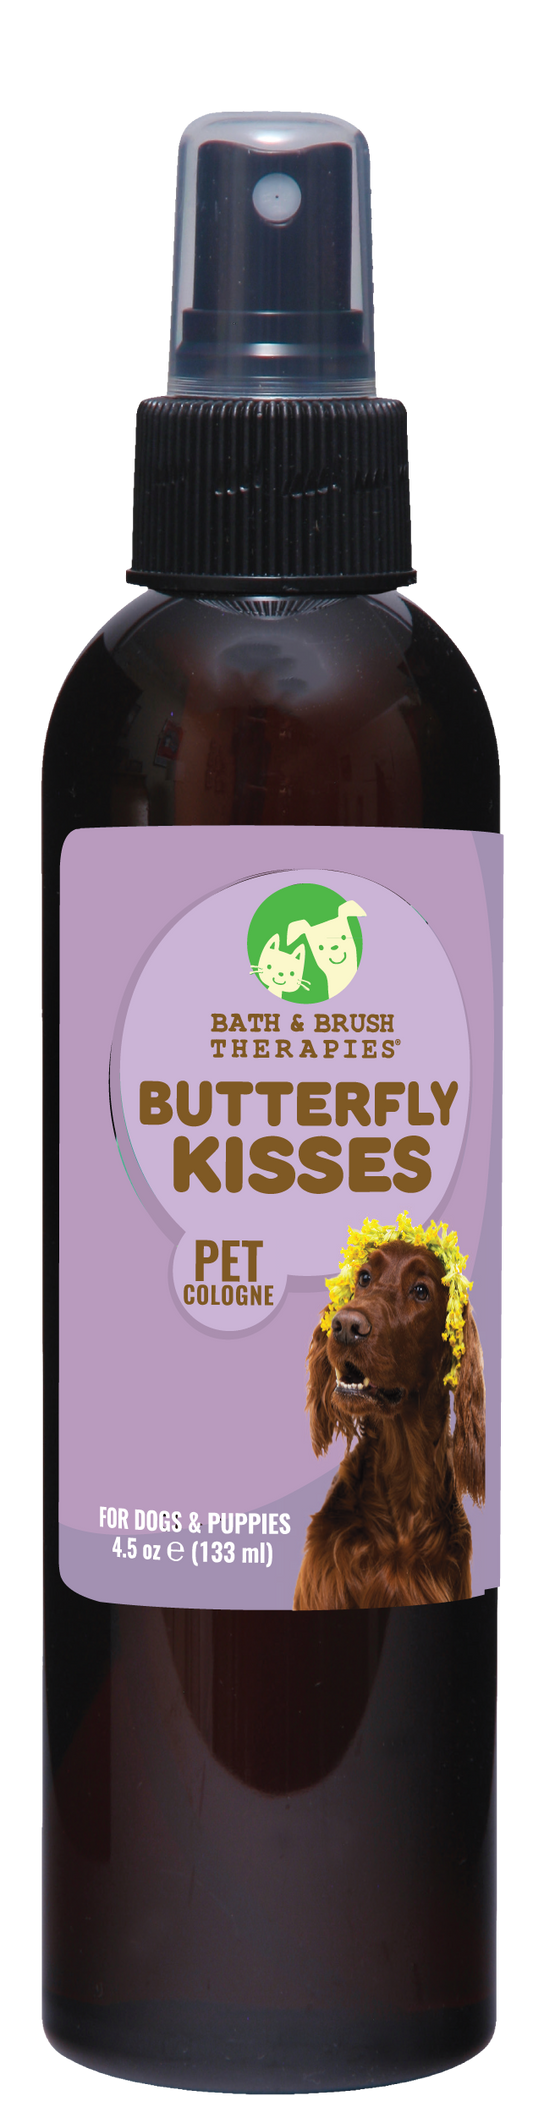 Butterfly Kisses Pet Cologne | Bath & Brush Therapies®